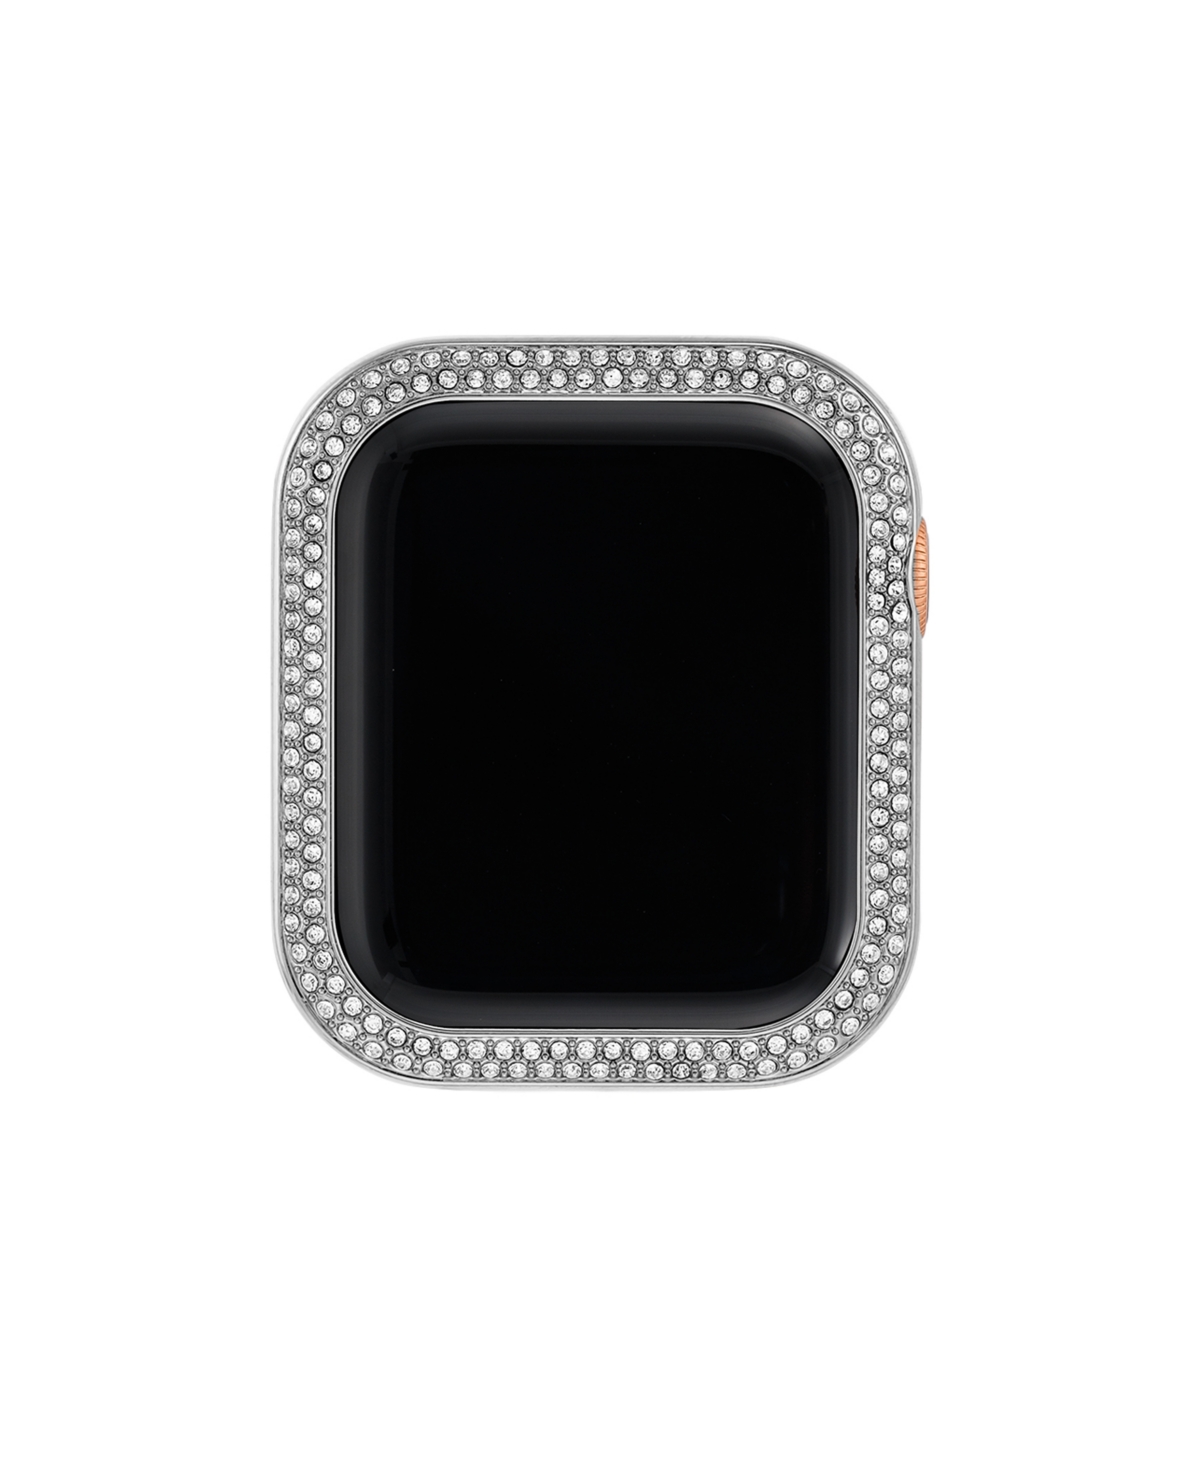 44mm Apple Watch Metal Protective Bumper in Silver With Crystal Accents - Silver Tone